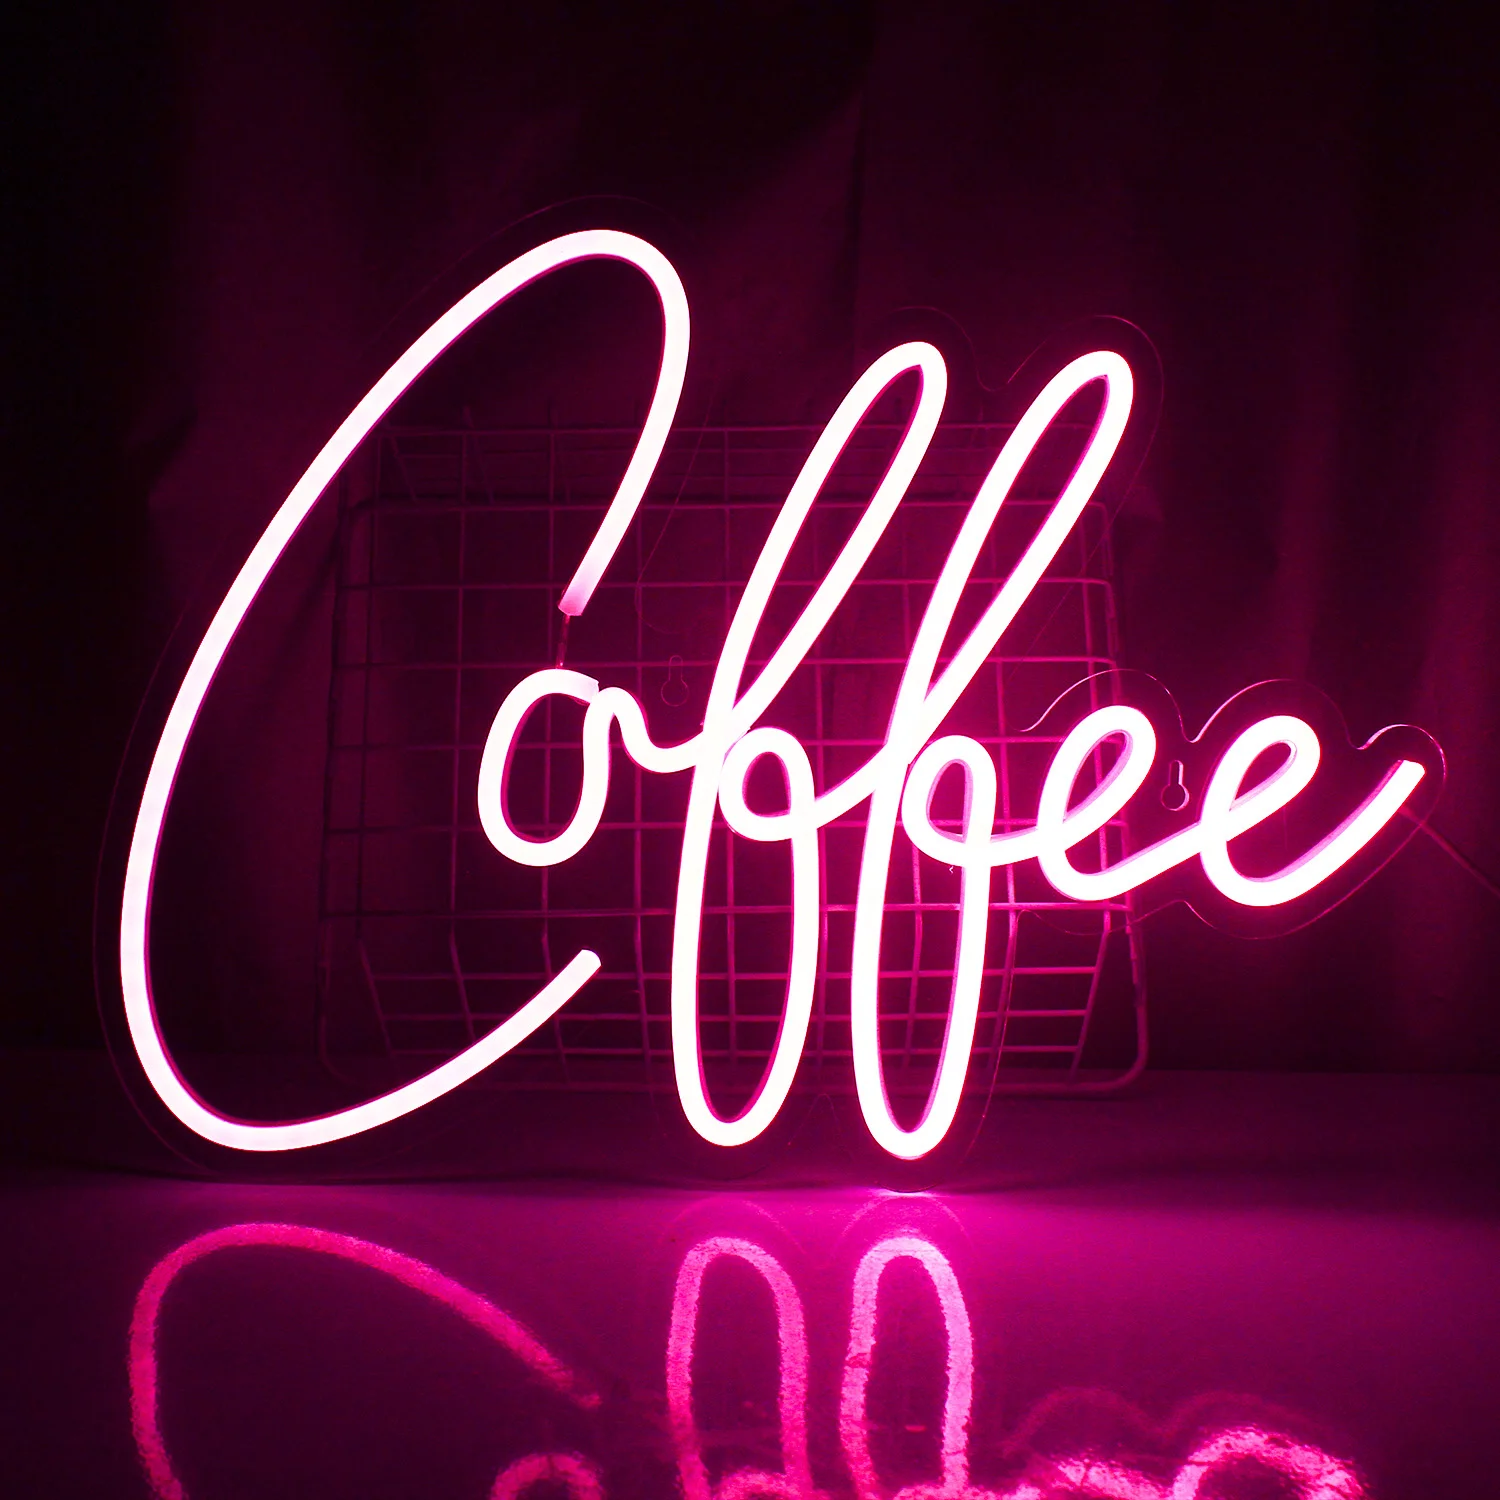 Pink Coffee Shop Neon Sign Led Acrylic Custom Light for Cafe Restaurant Hotel Bar Club Party Beautiful  Decorate Neon Light pink coffee shop neon sign led acrylic custom light for cafe restaurant hotel bar club party beautiful decorate neon light